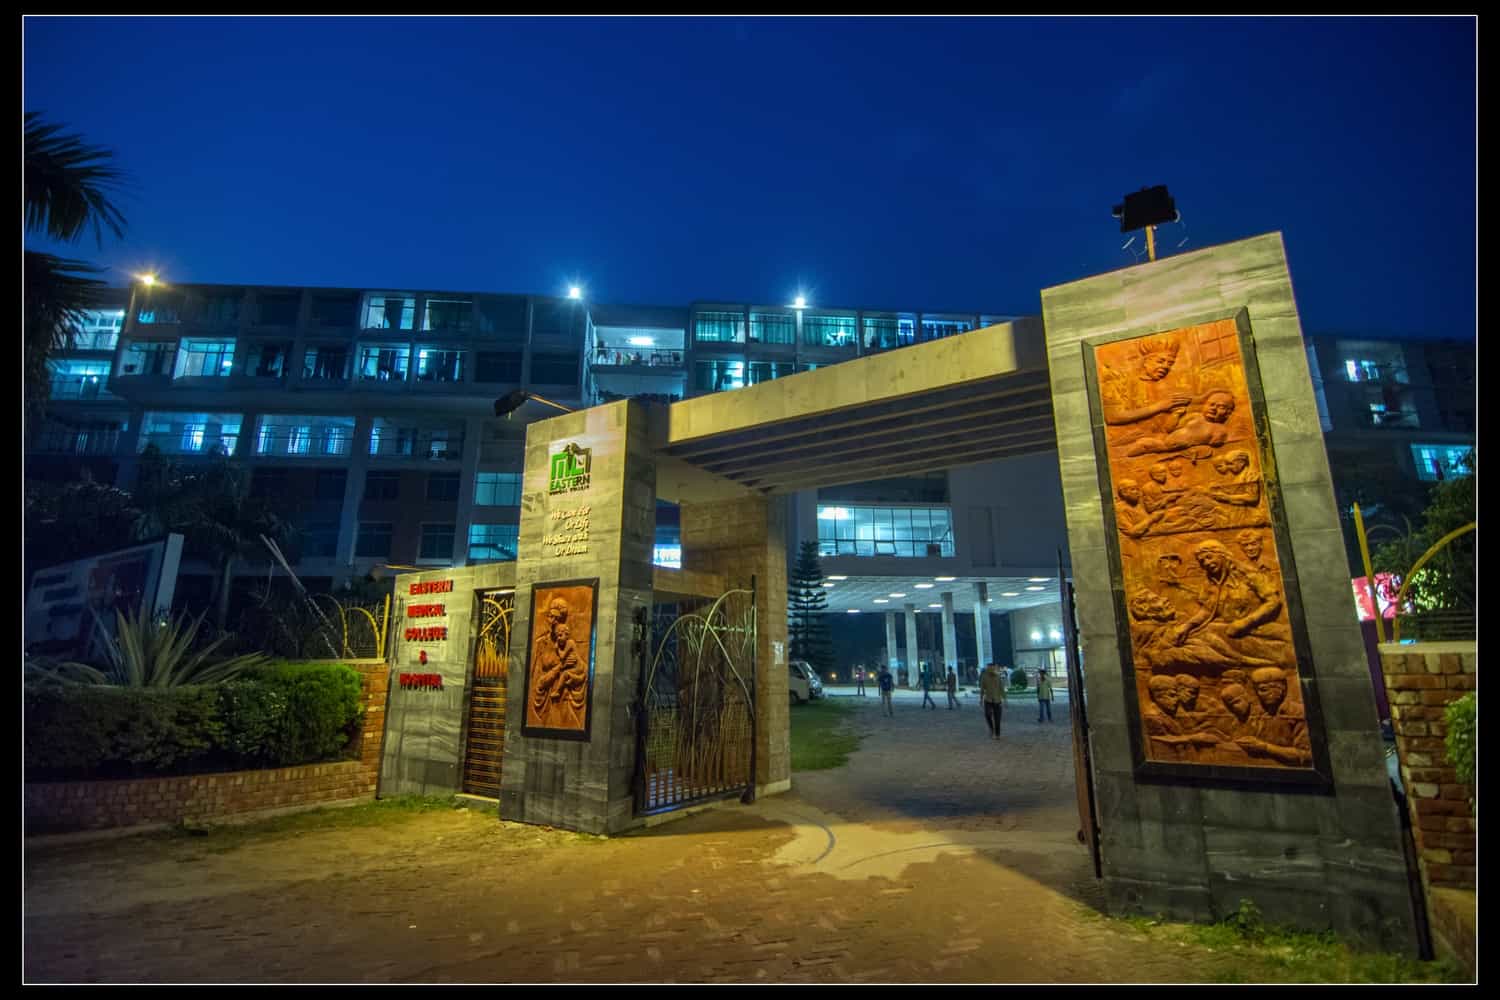 Eastern Medical College & Hospital Front Gate at Night